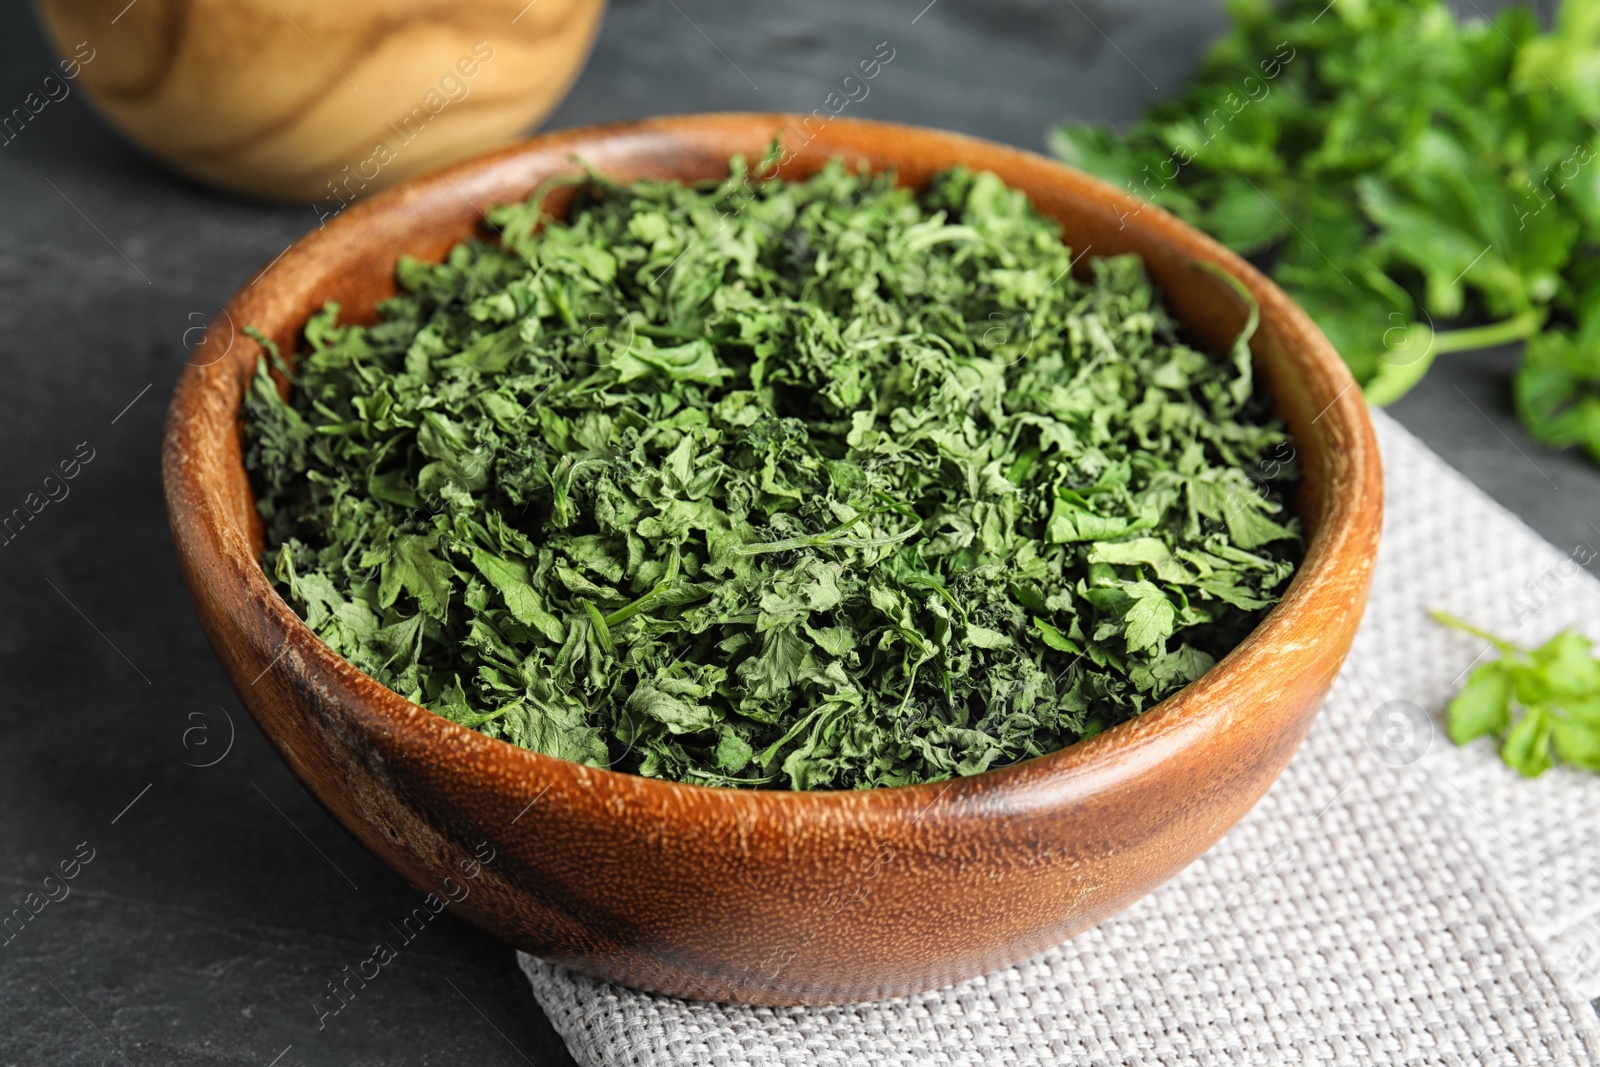 Photo of Wooden bowl of dried parsley on table, closeup